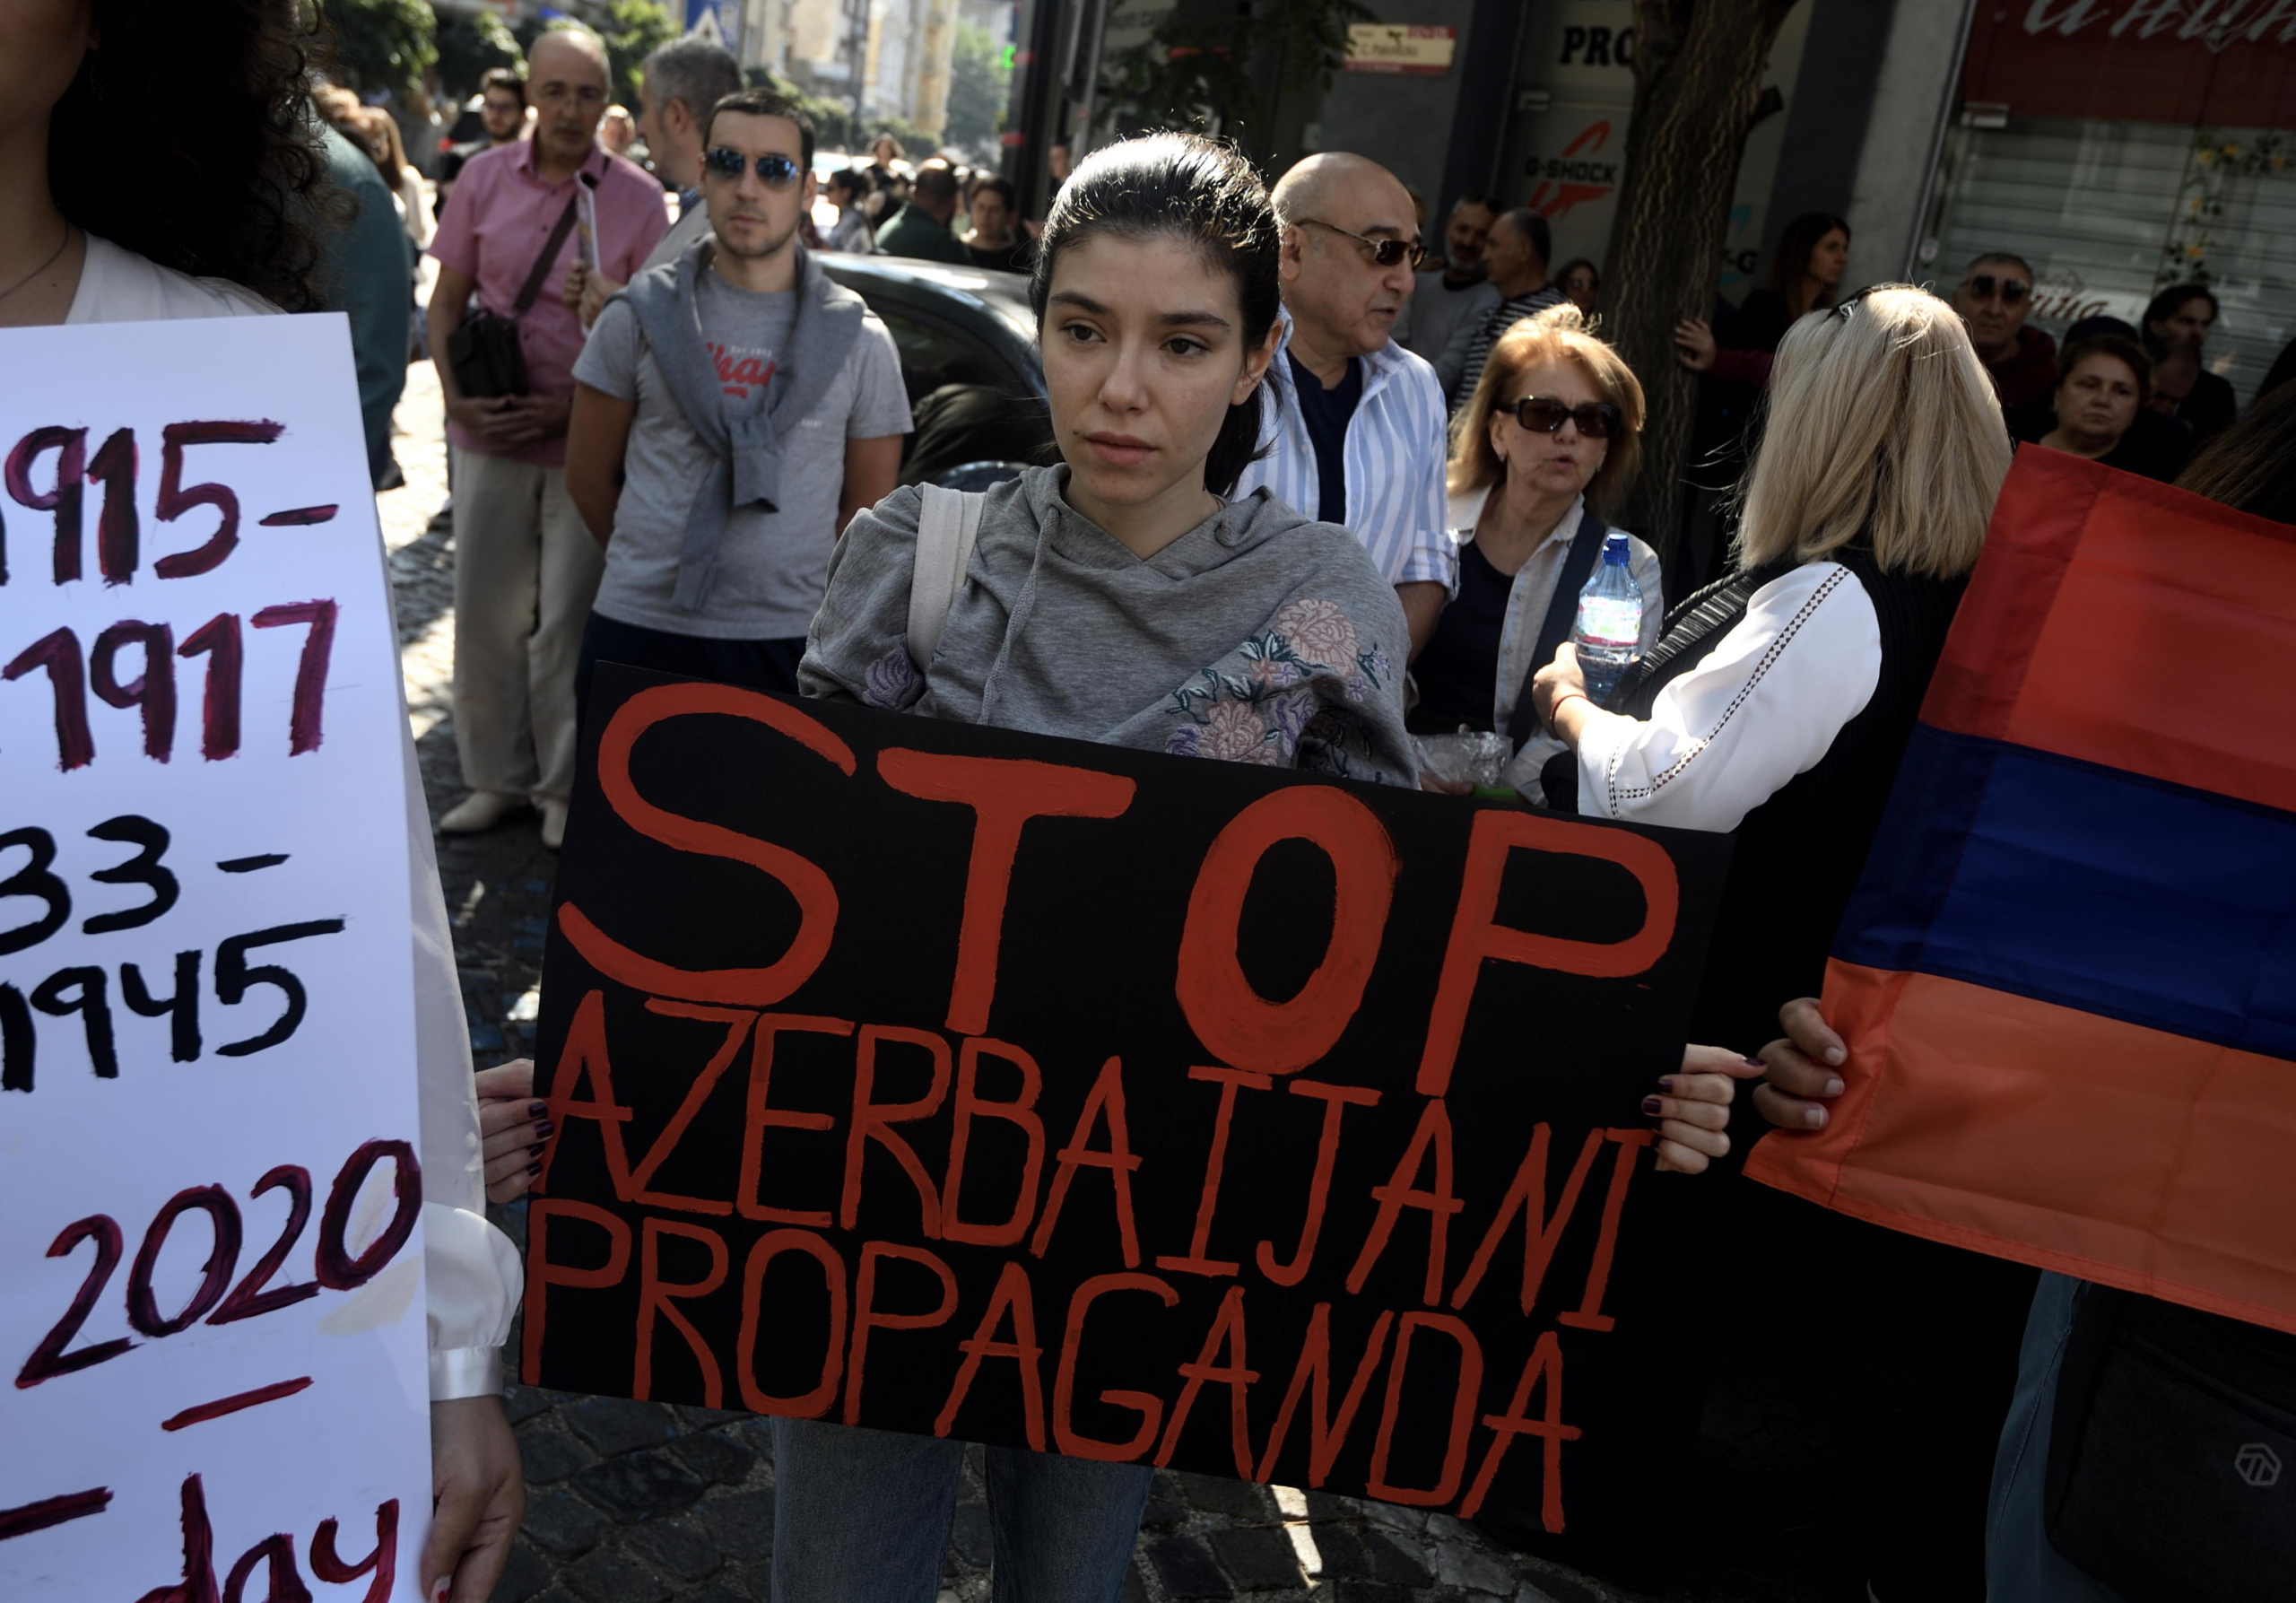 epa10893664 An Armenian holds a poster during a protest against the emptying of Nagorno-Karabakh of ethnic Armenians in front of the building of the European Commission in in Sofia, Bulgaria, 01 October 2023. Azerbaijan on 19 September 2023 launched a brief military offensive on the contested region of Nagorno-Karabakh, a breakaway enclave that is home to some 120,000 ethnic Armenians. Following a ceasefire agreed on 20 September 2023, Azerbaijan opened all checkpoints with Armenia for the unimpeded exit of civilians from the disputed territory. The Armenian government announced the evacuation of more than 100,000 local residents from Nagorno-Karabakh, and a humanitarian center has been set up in the village of Kornidzor near the so-called Lachin corridor, the main route between Armenia and the breakaway region.  EPA/VASSIL DONEV